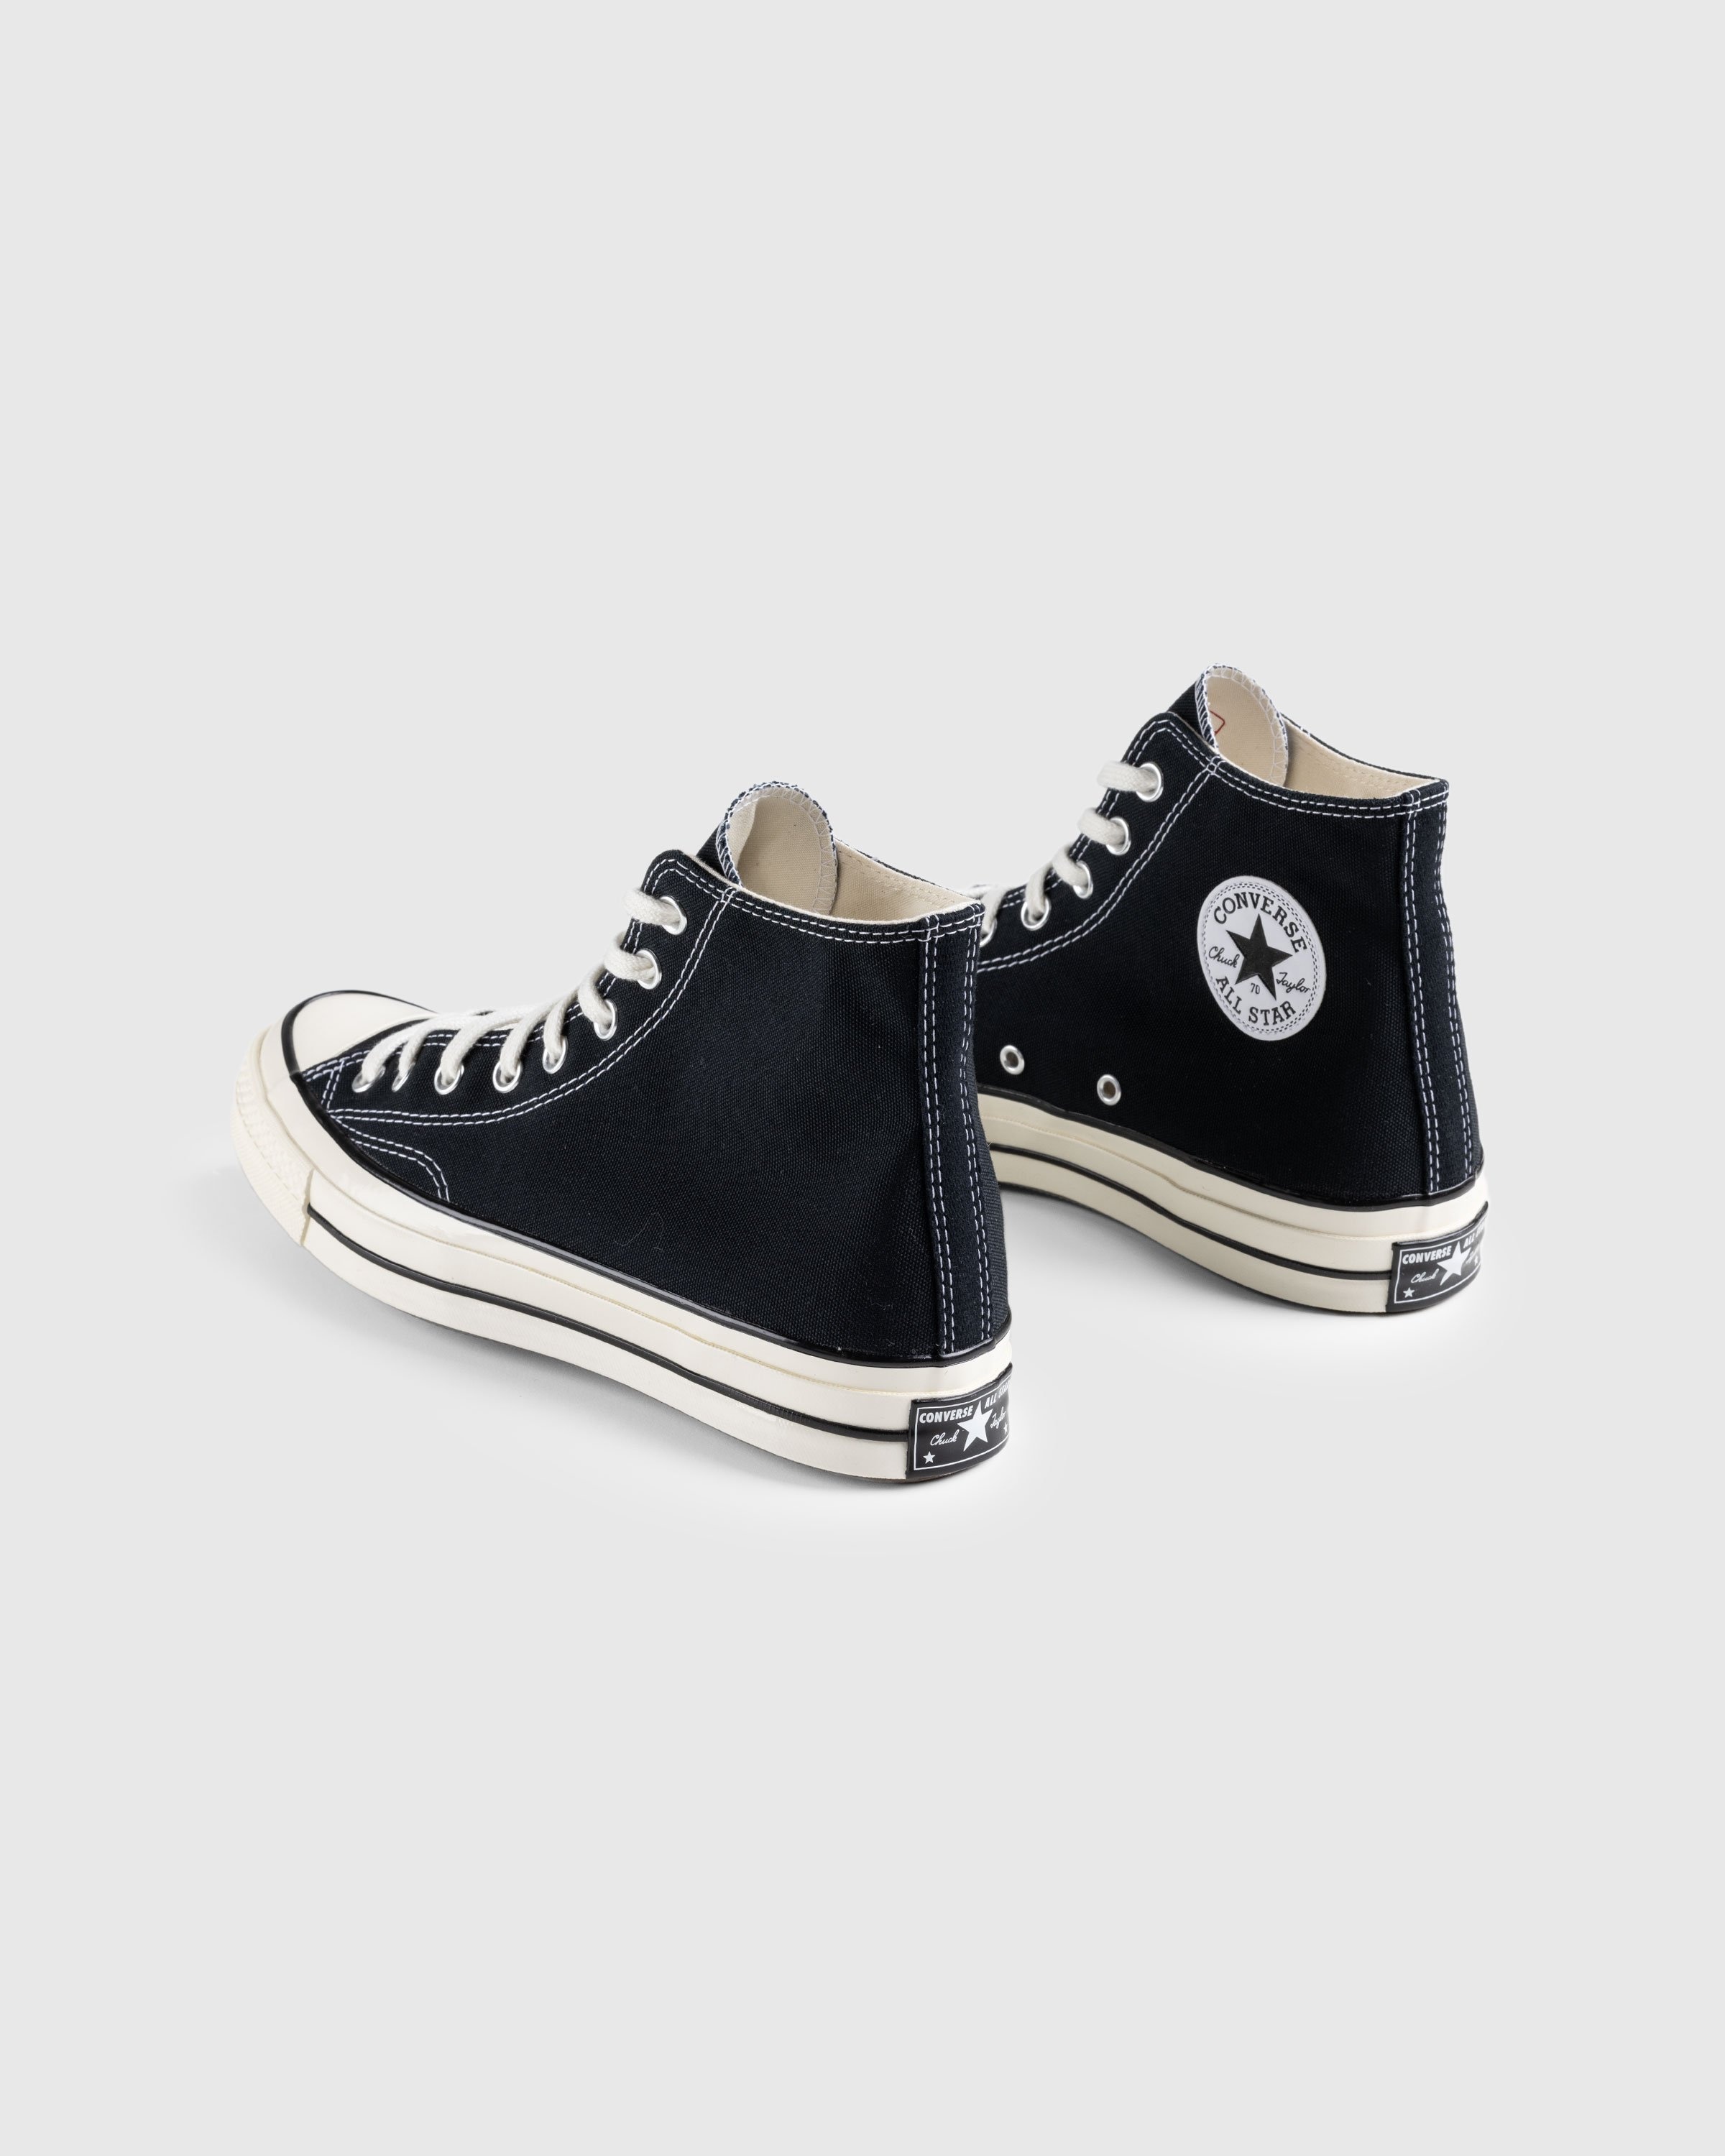 Converse - everything you need to know!, Highsnobiety